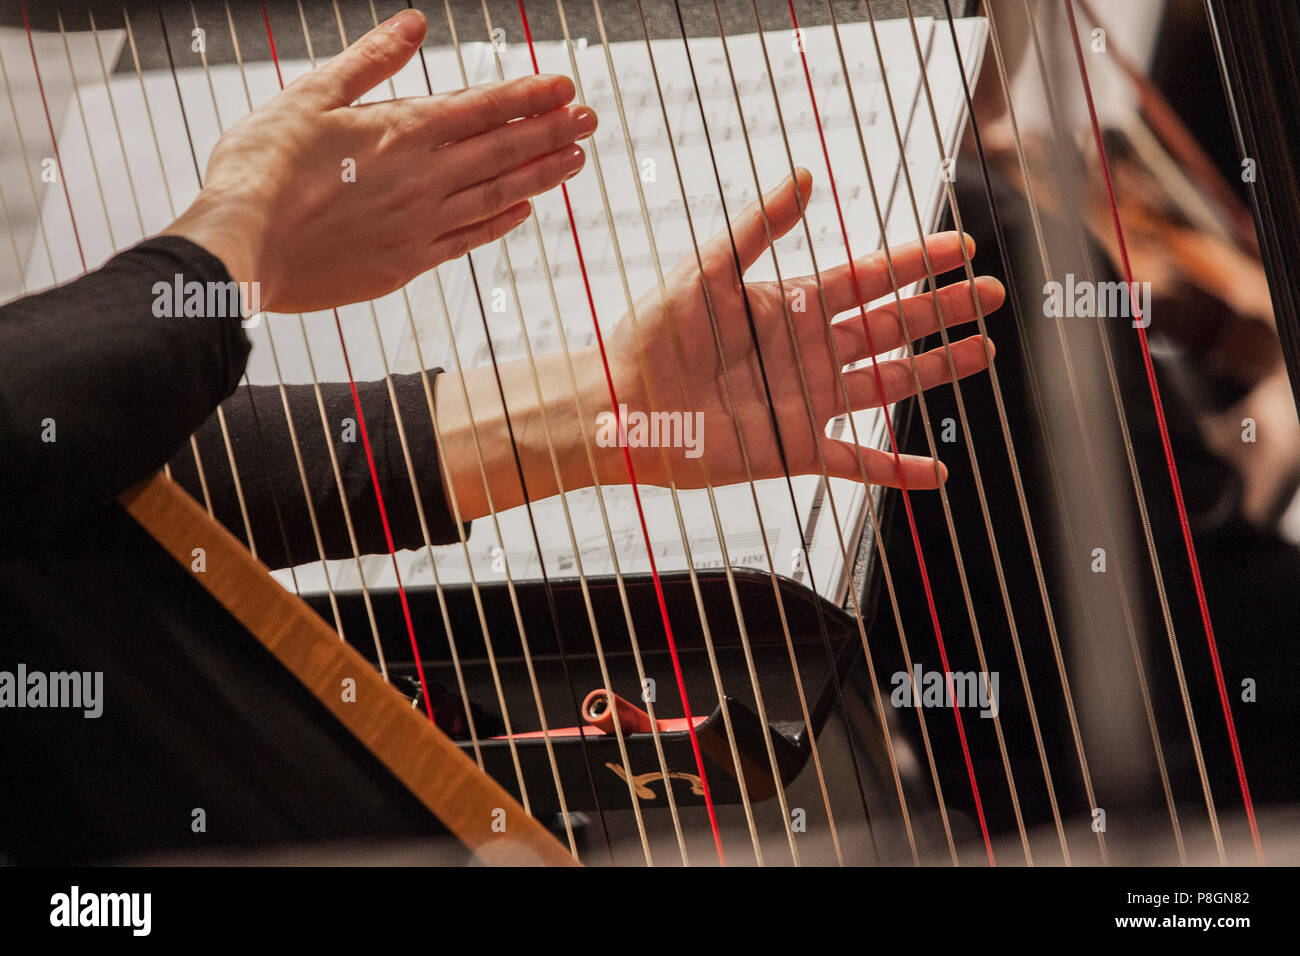 Harpist Playing Harp In Orchestra Stock Photo